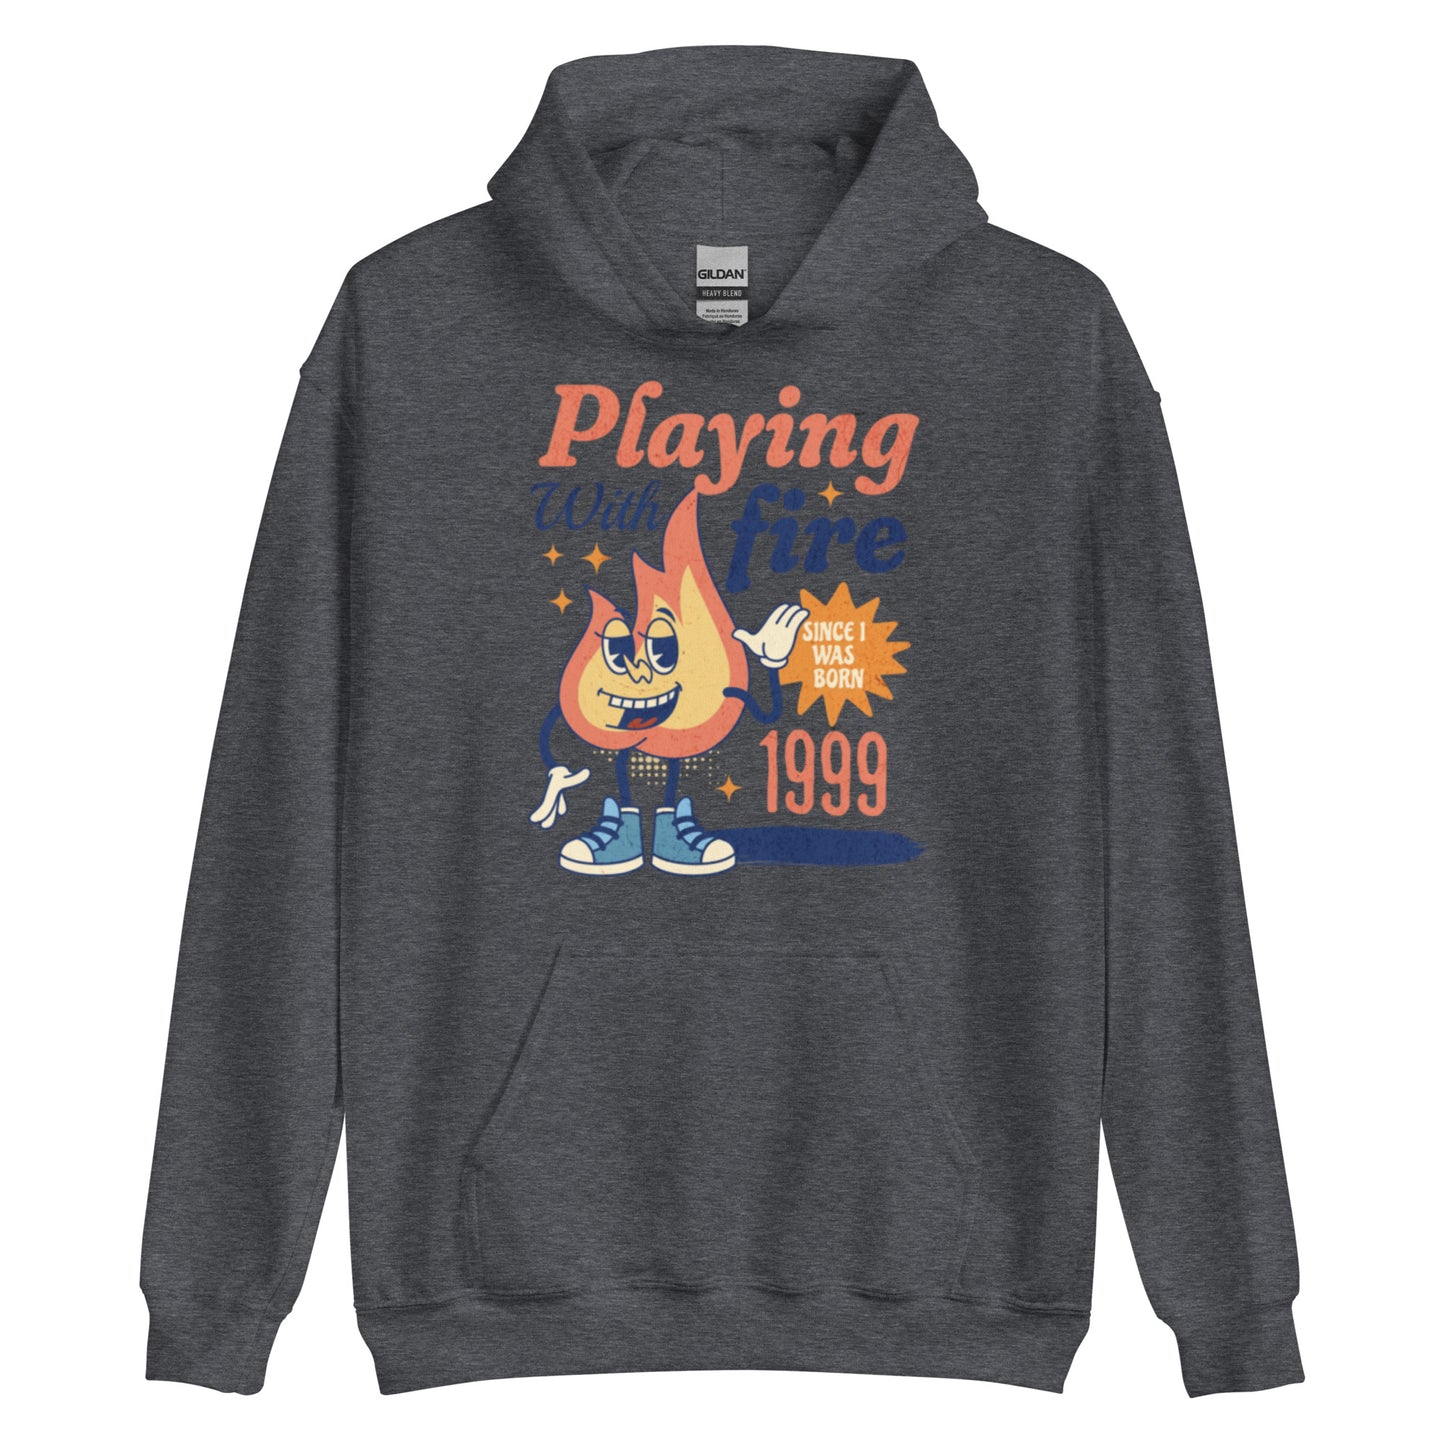 Playing With Fire Mascot Hoodie